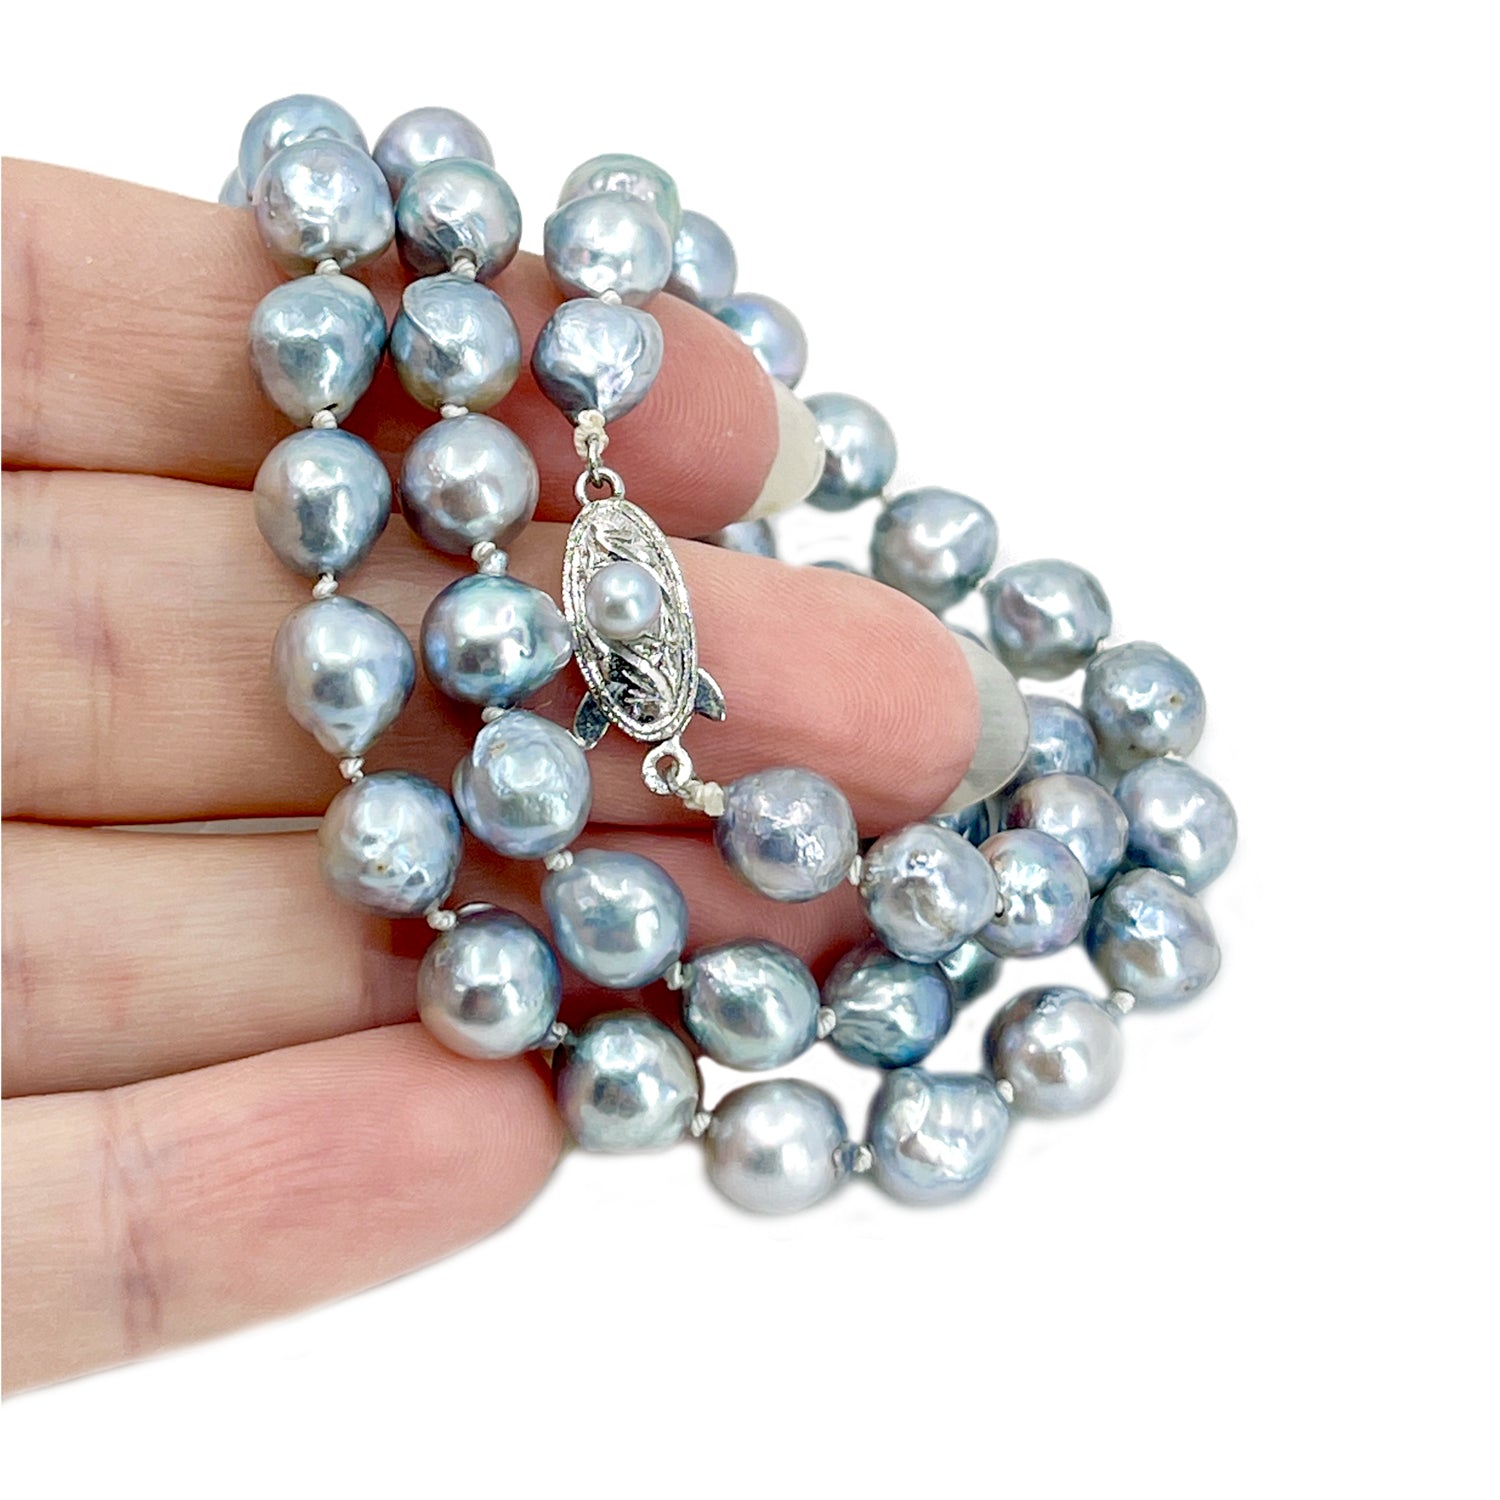 Vintage Baroque Blue Japanese Saltwater Cultured Akoya Pearl Necklace - Sterling Silver 18.25 Inch